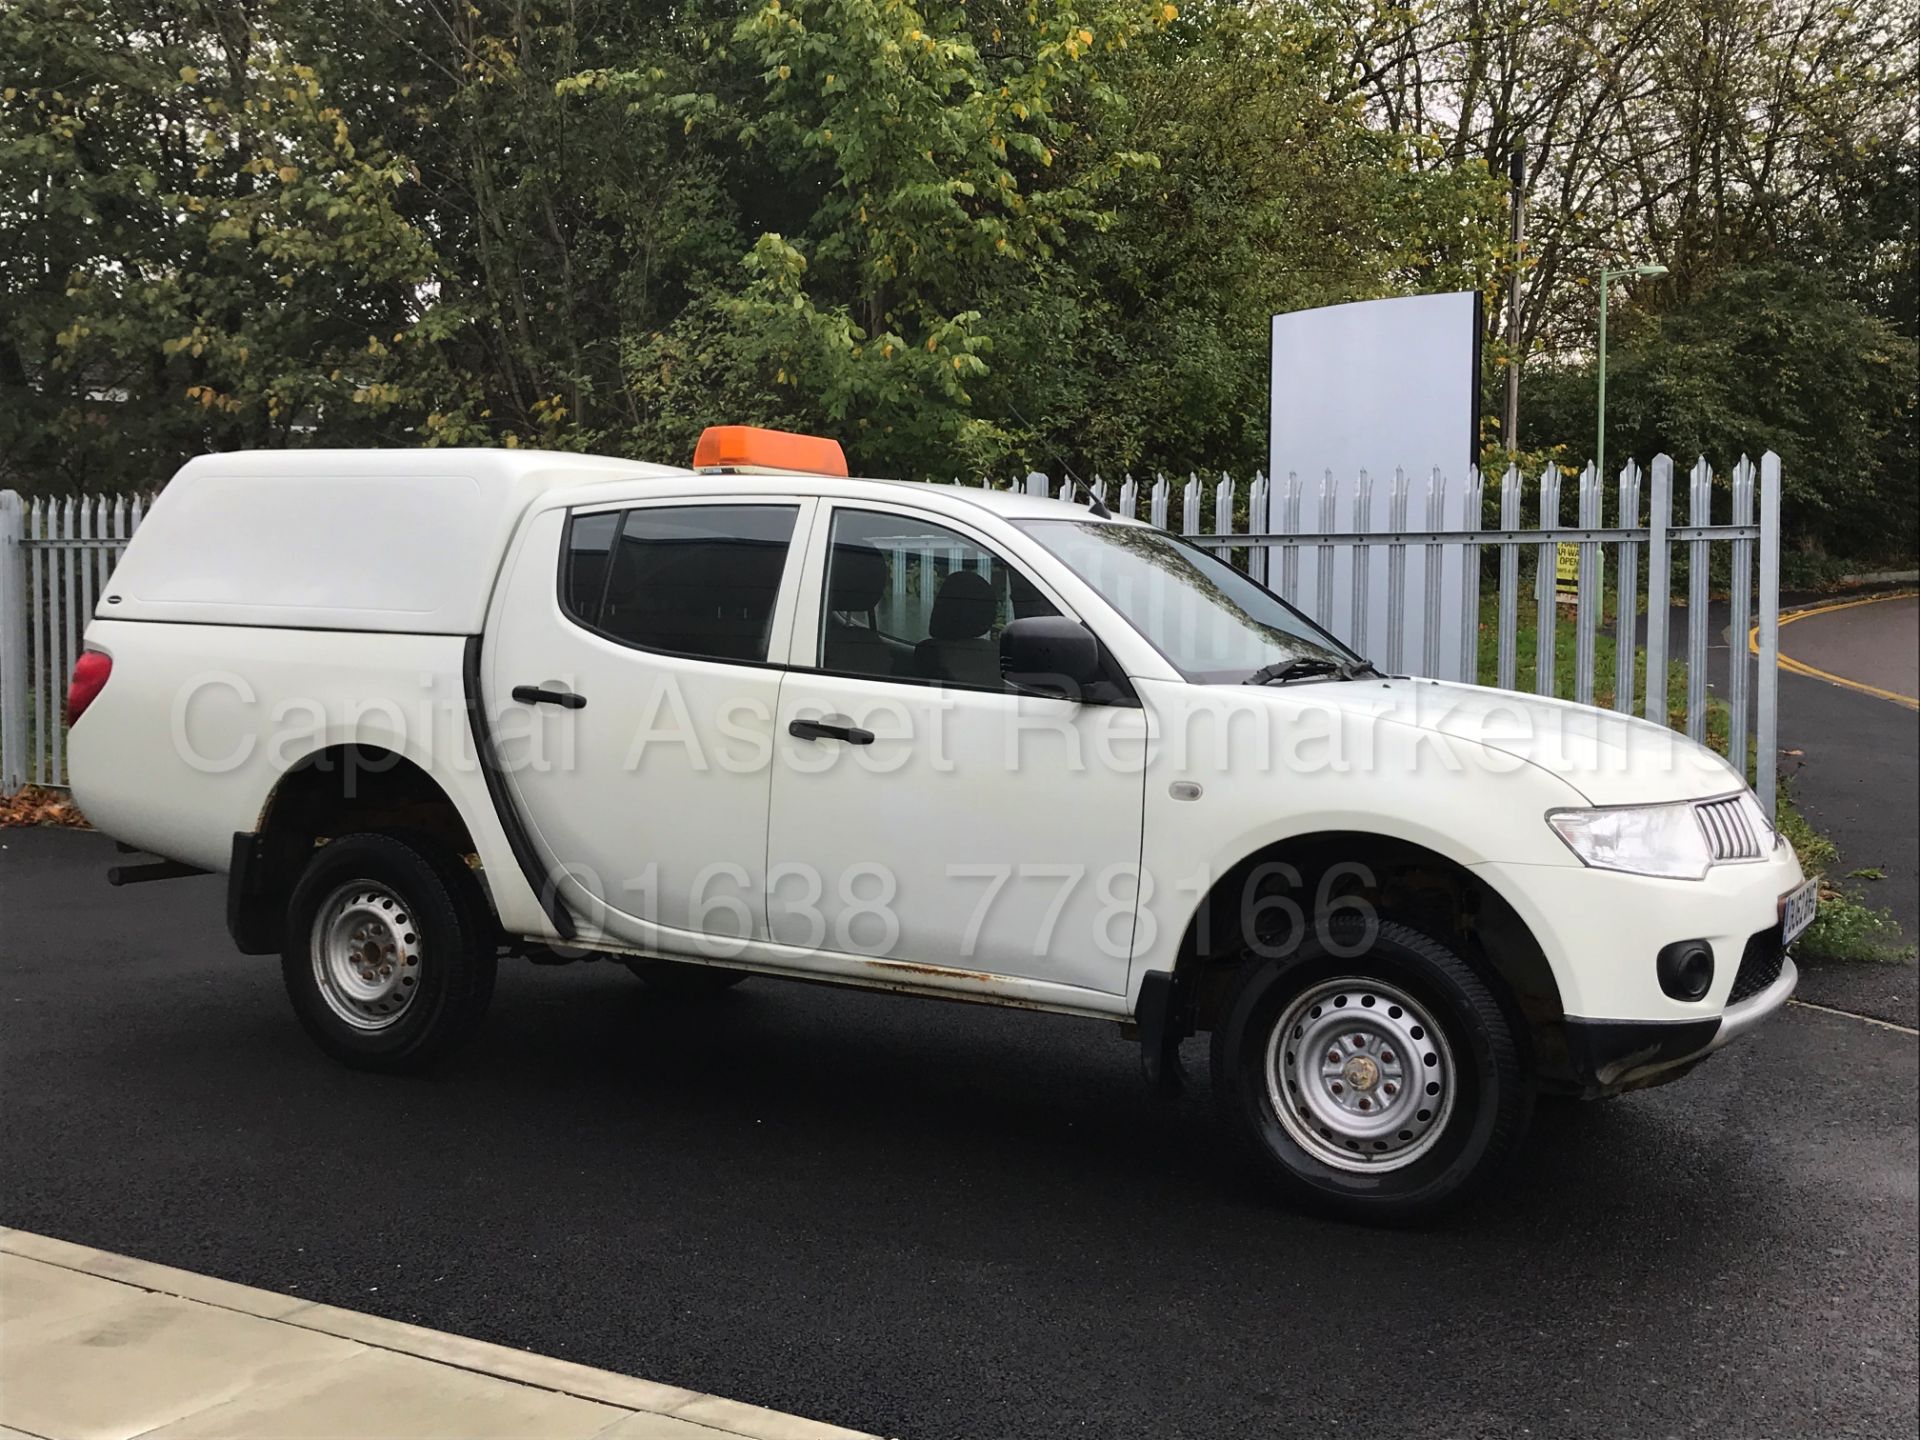 (On Sale) MITSUBISHI L200 DOUBLE CAB PICK-UP (2013 MODEL) '2.5 DI-D - 136 BHP' (1 OWNER) *31K MILES* - Image 7 of 26